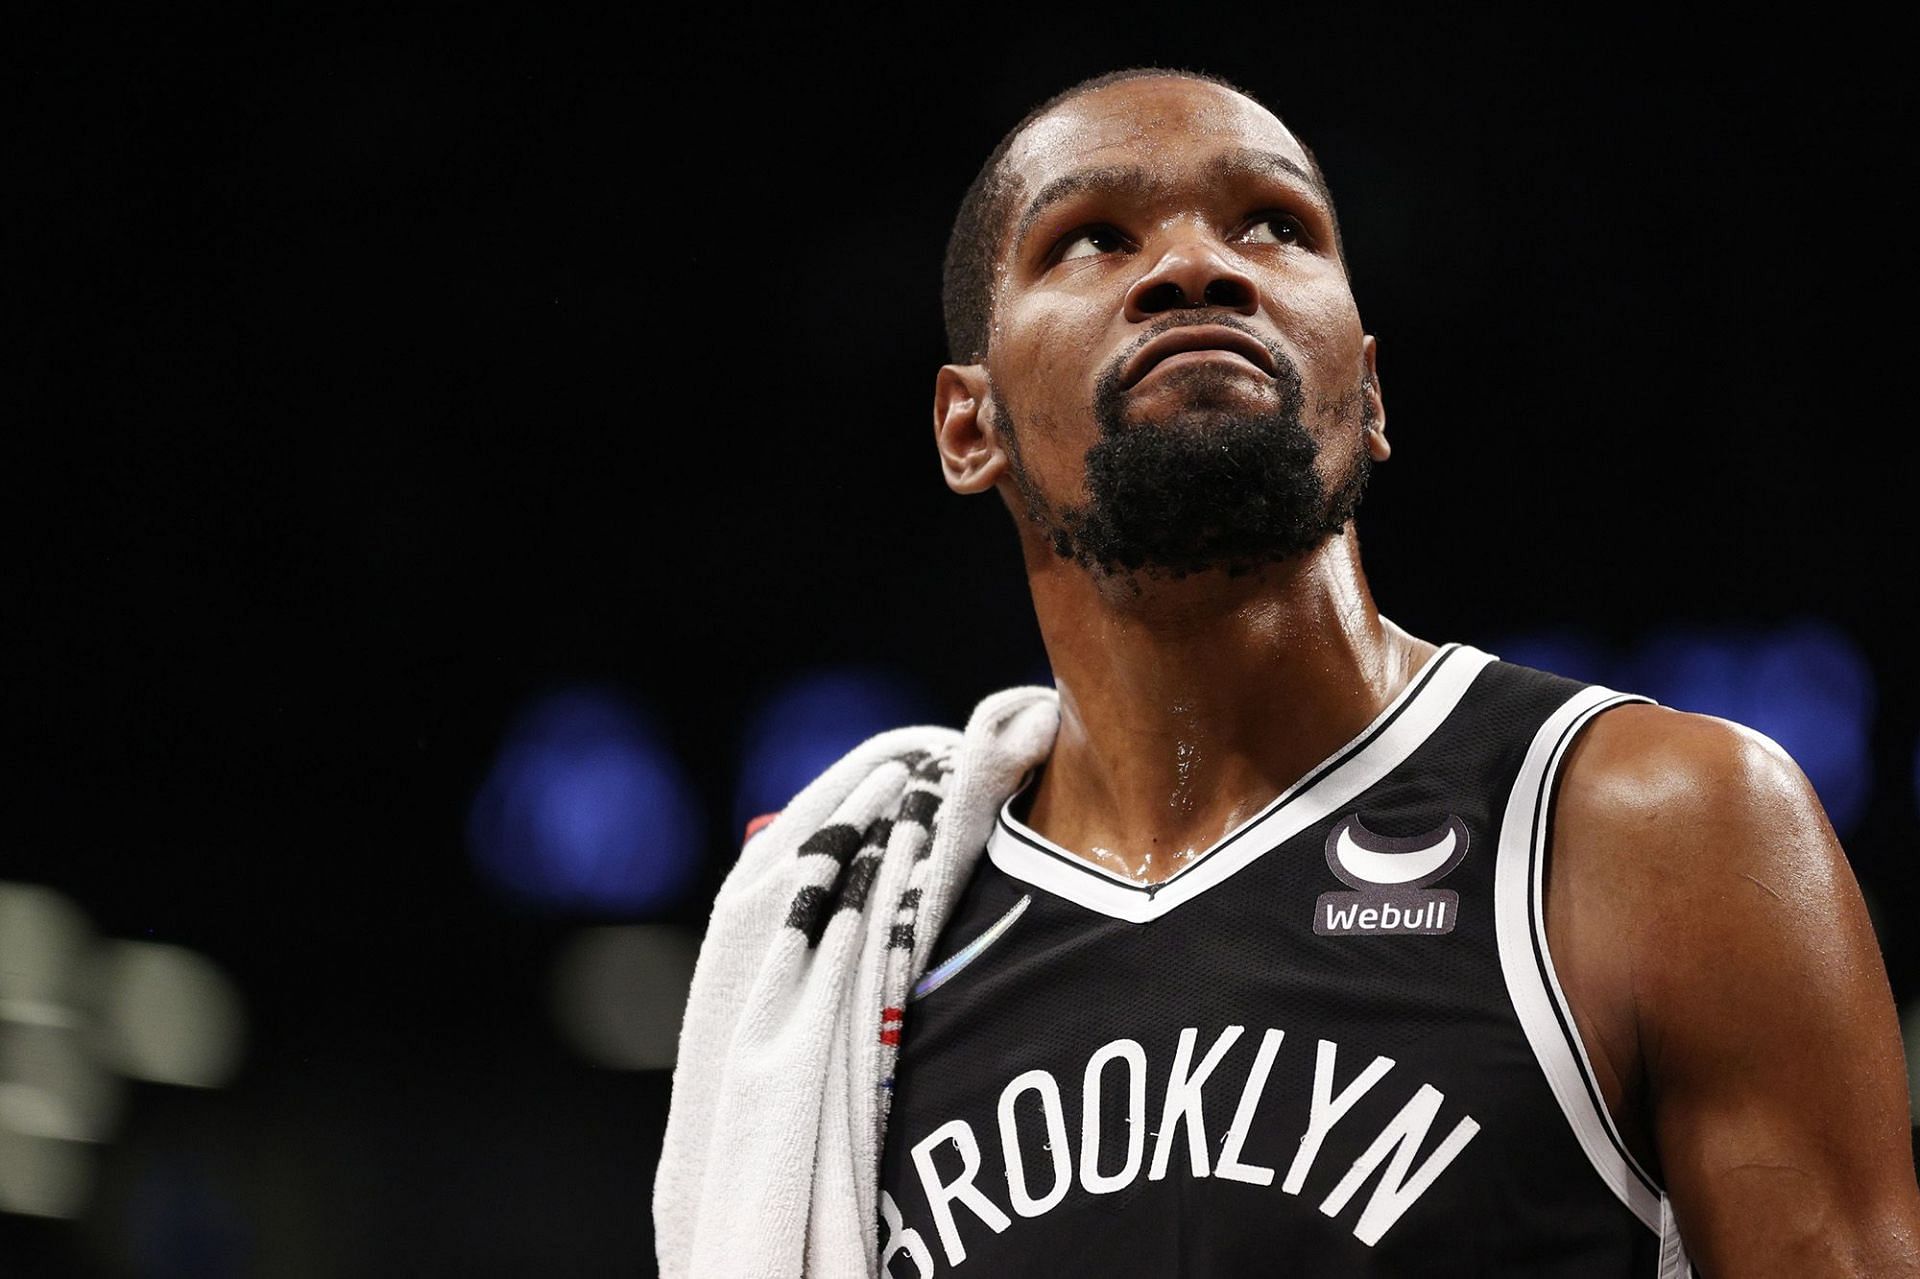 Kevin Durant is still with the Brooklyn Nets more than a month after informing Joe Tsai he wants to be traded. [Photo: New York Post]